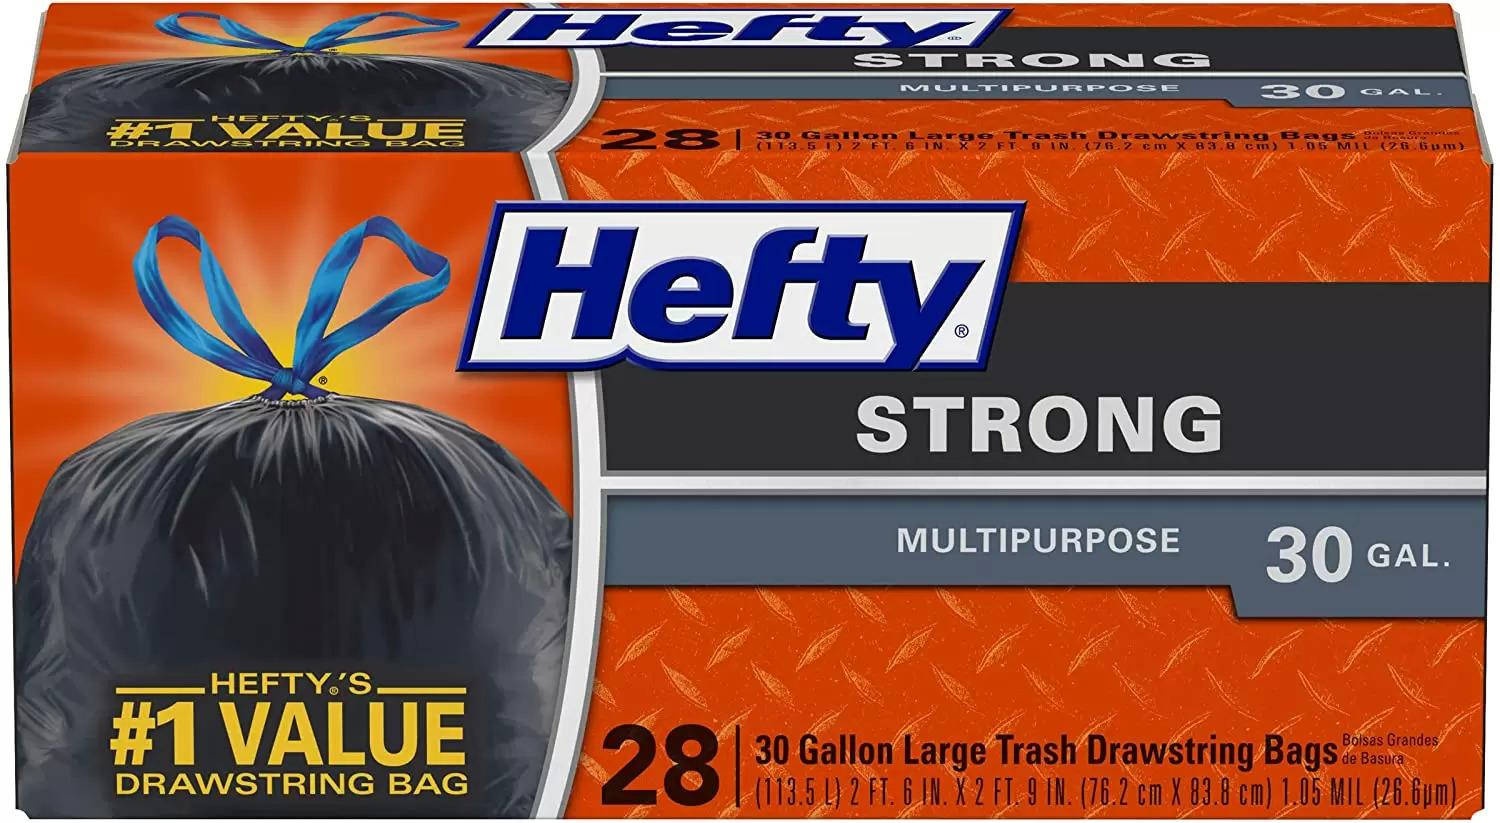 28 Hefty Strong Large Trash Bags for $5.25 Shipped